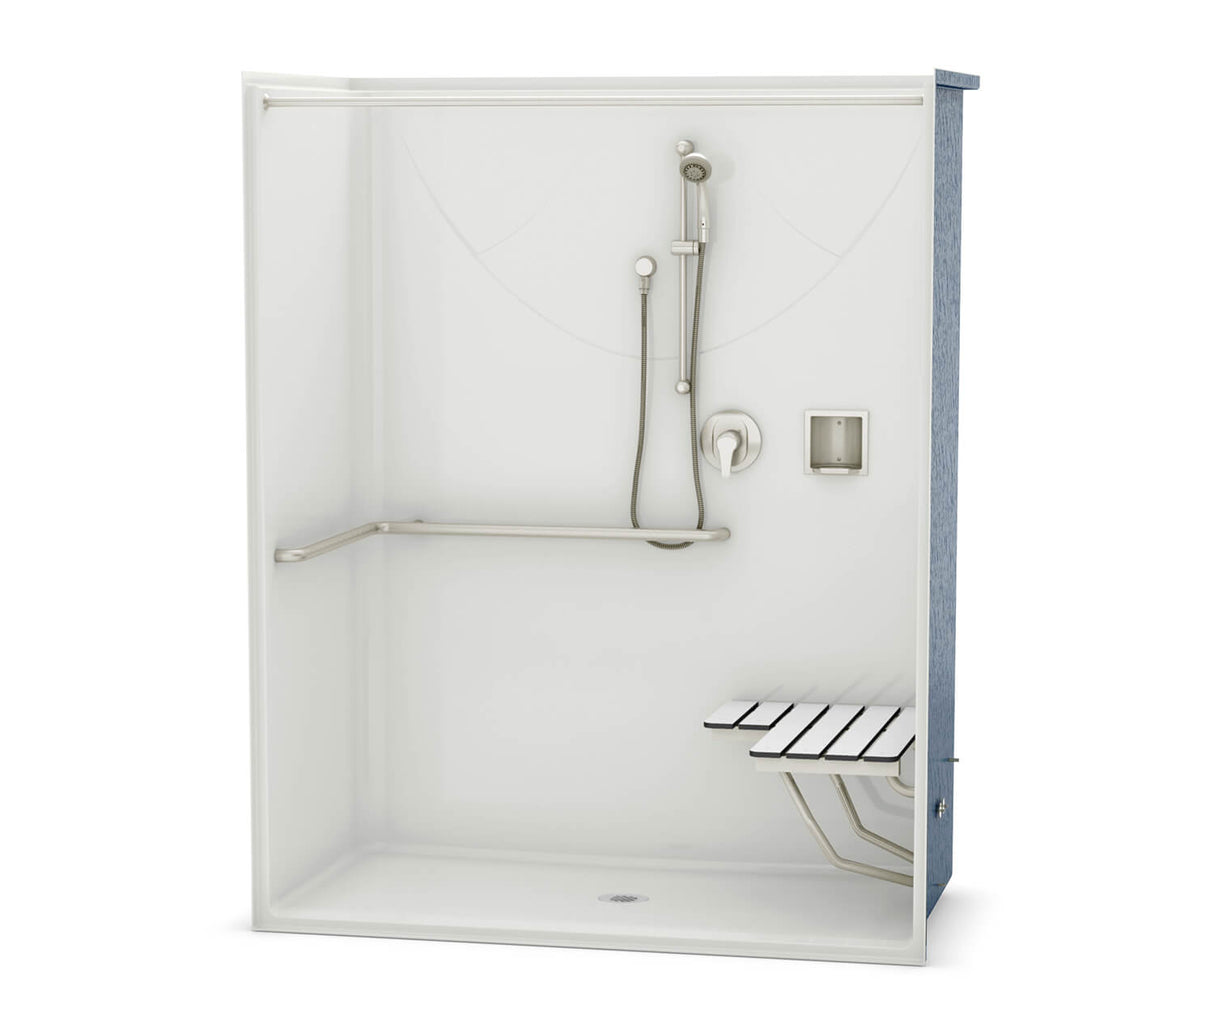 Aker OPS-6030-RS AcrylX Alcove Center Drain One-Piece Shower in Black - ADA Compliant (with Seat)